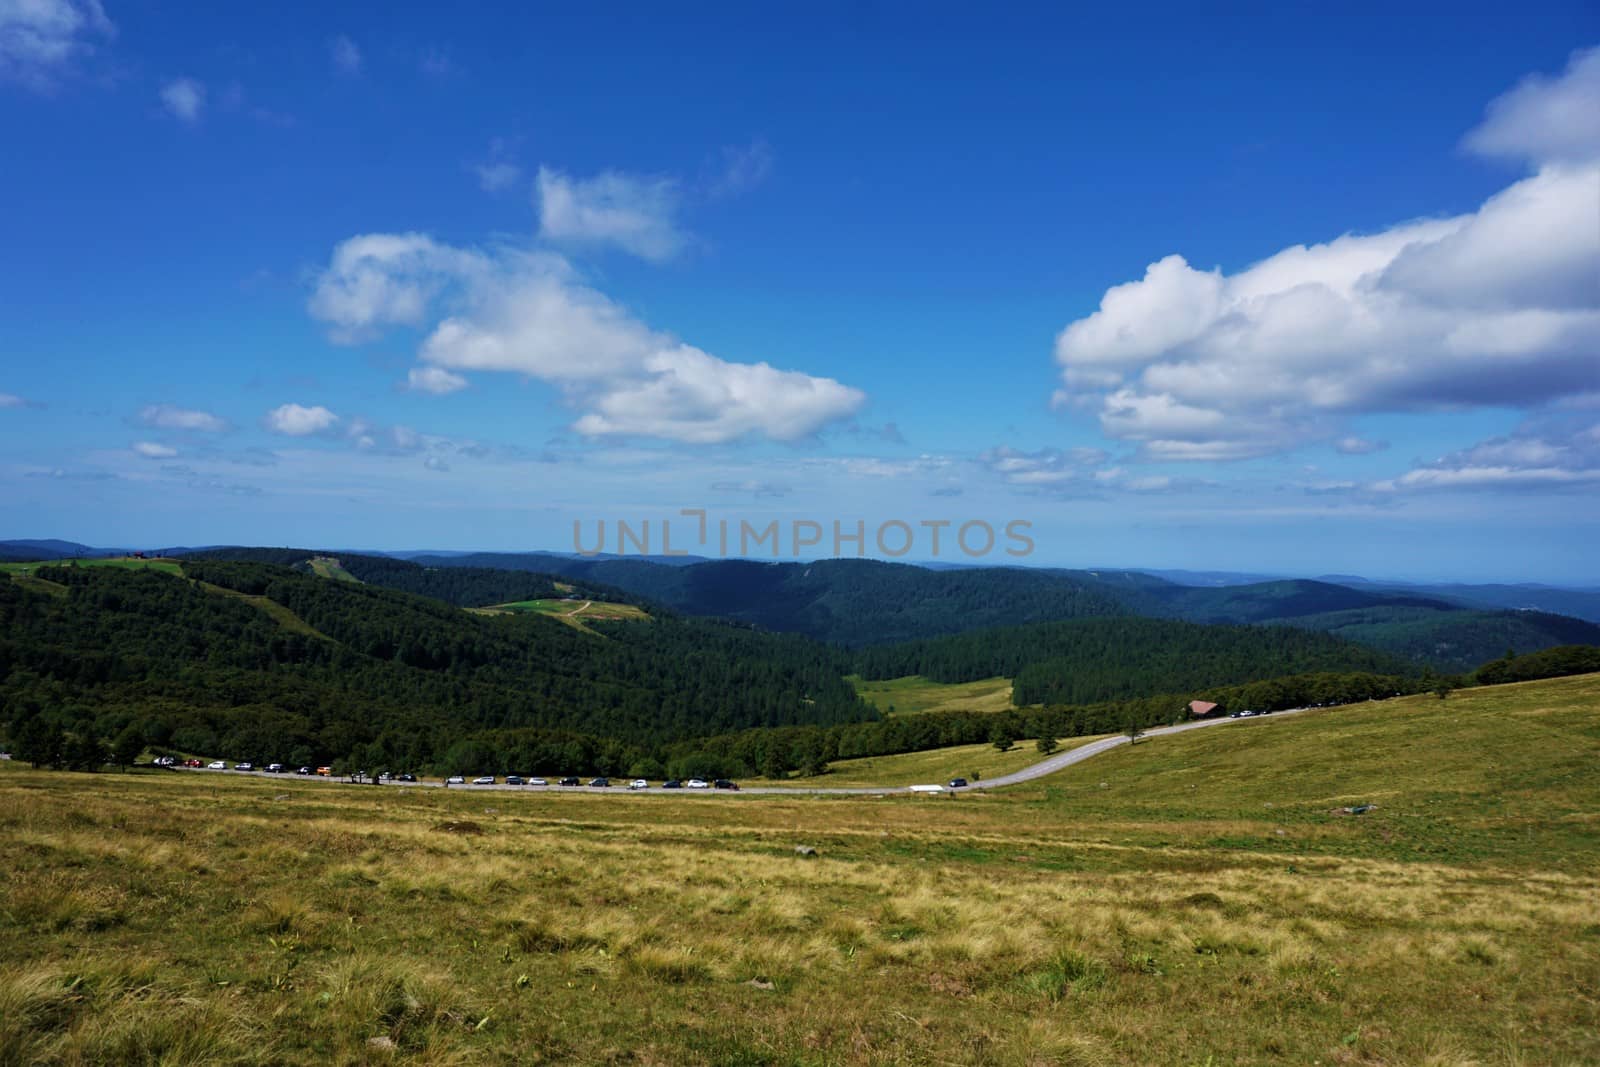 Beautiful view from Le Hohneck mountain over the hilly landscape of the Vosges mountain range in France